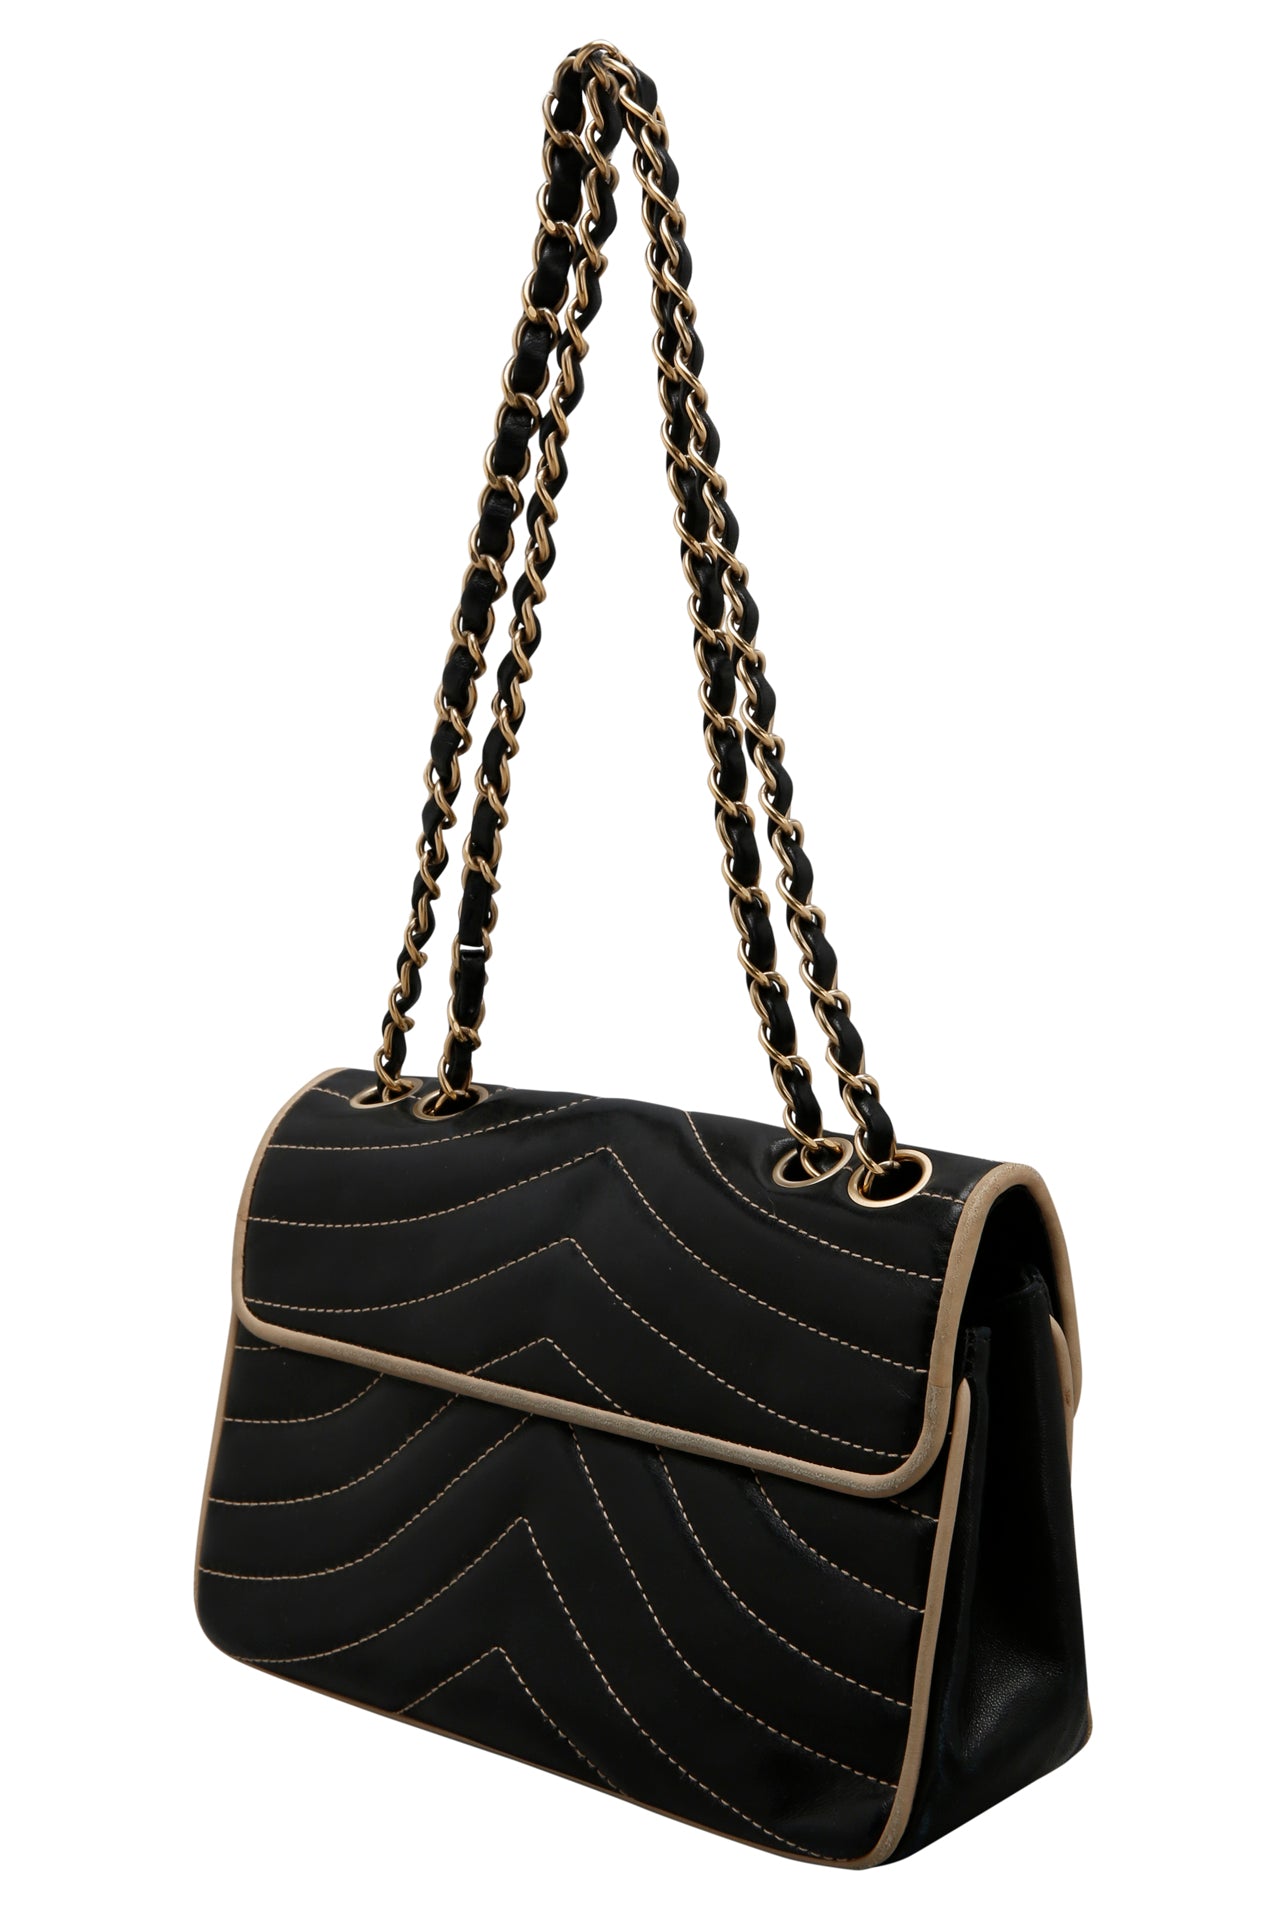 Chanel Navy Blue Chevron Contrast Quilted Lambskin Flap Bag